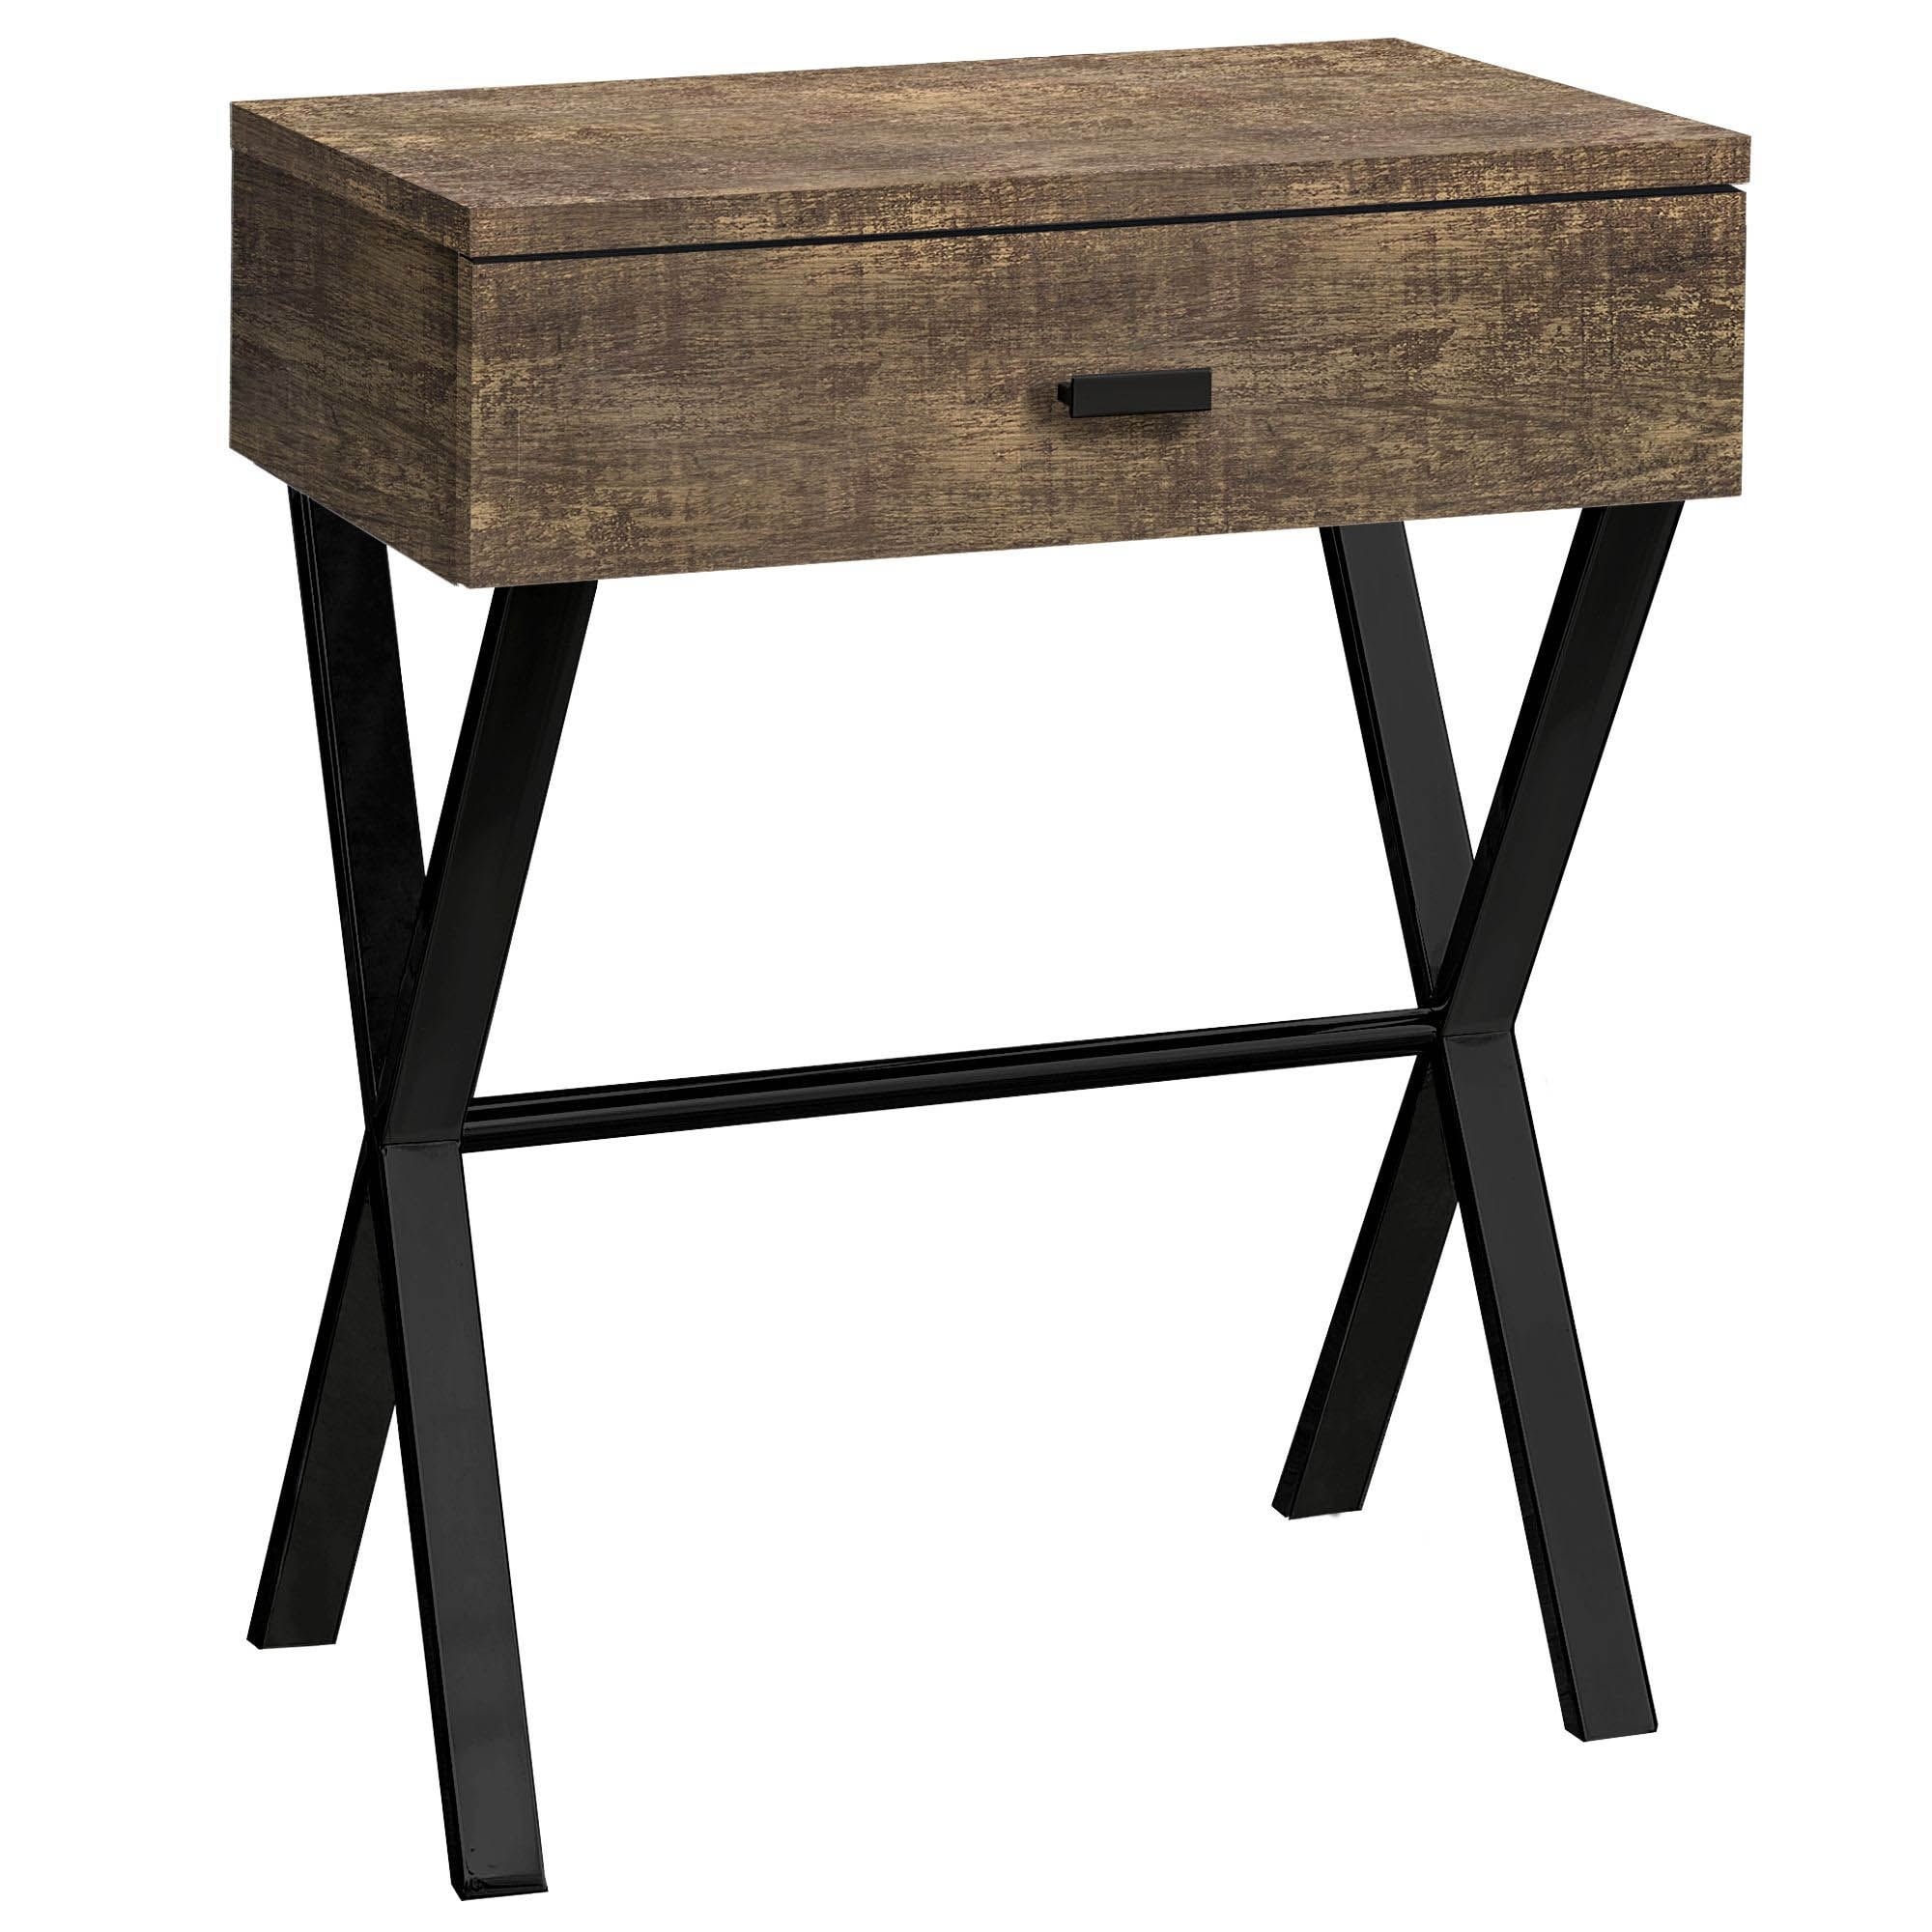 Offex 24 H Contemporary Brown Reclaimed Wood Look Accent Bedroom Night Stand With Black Metal Base On Sale Overstock 31664609